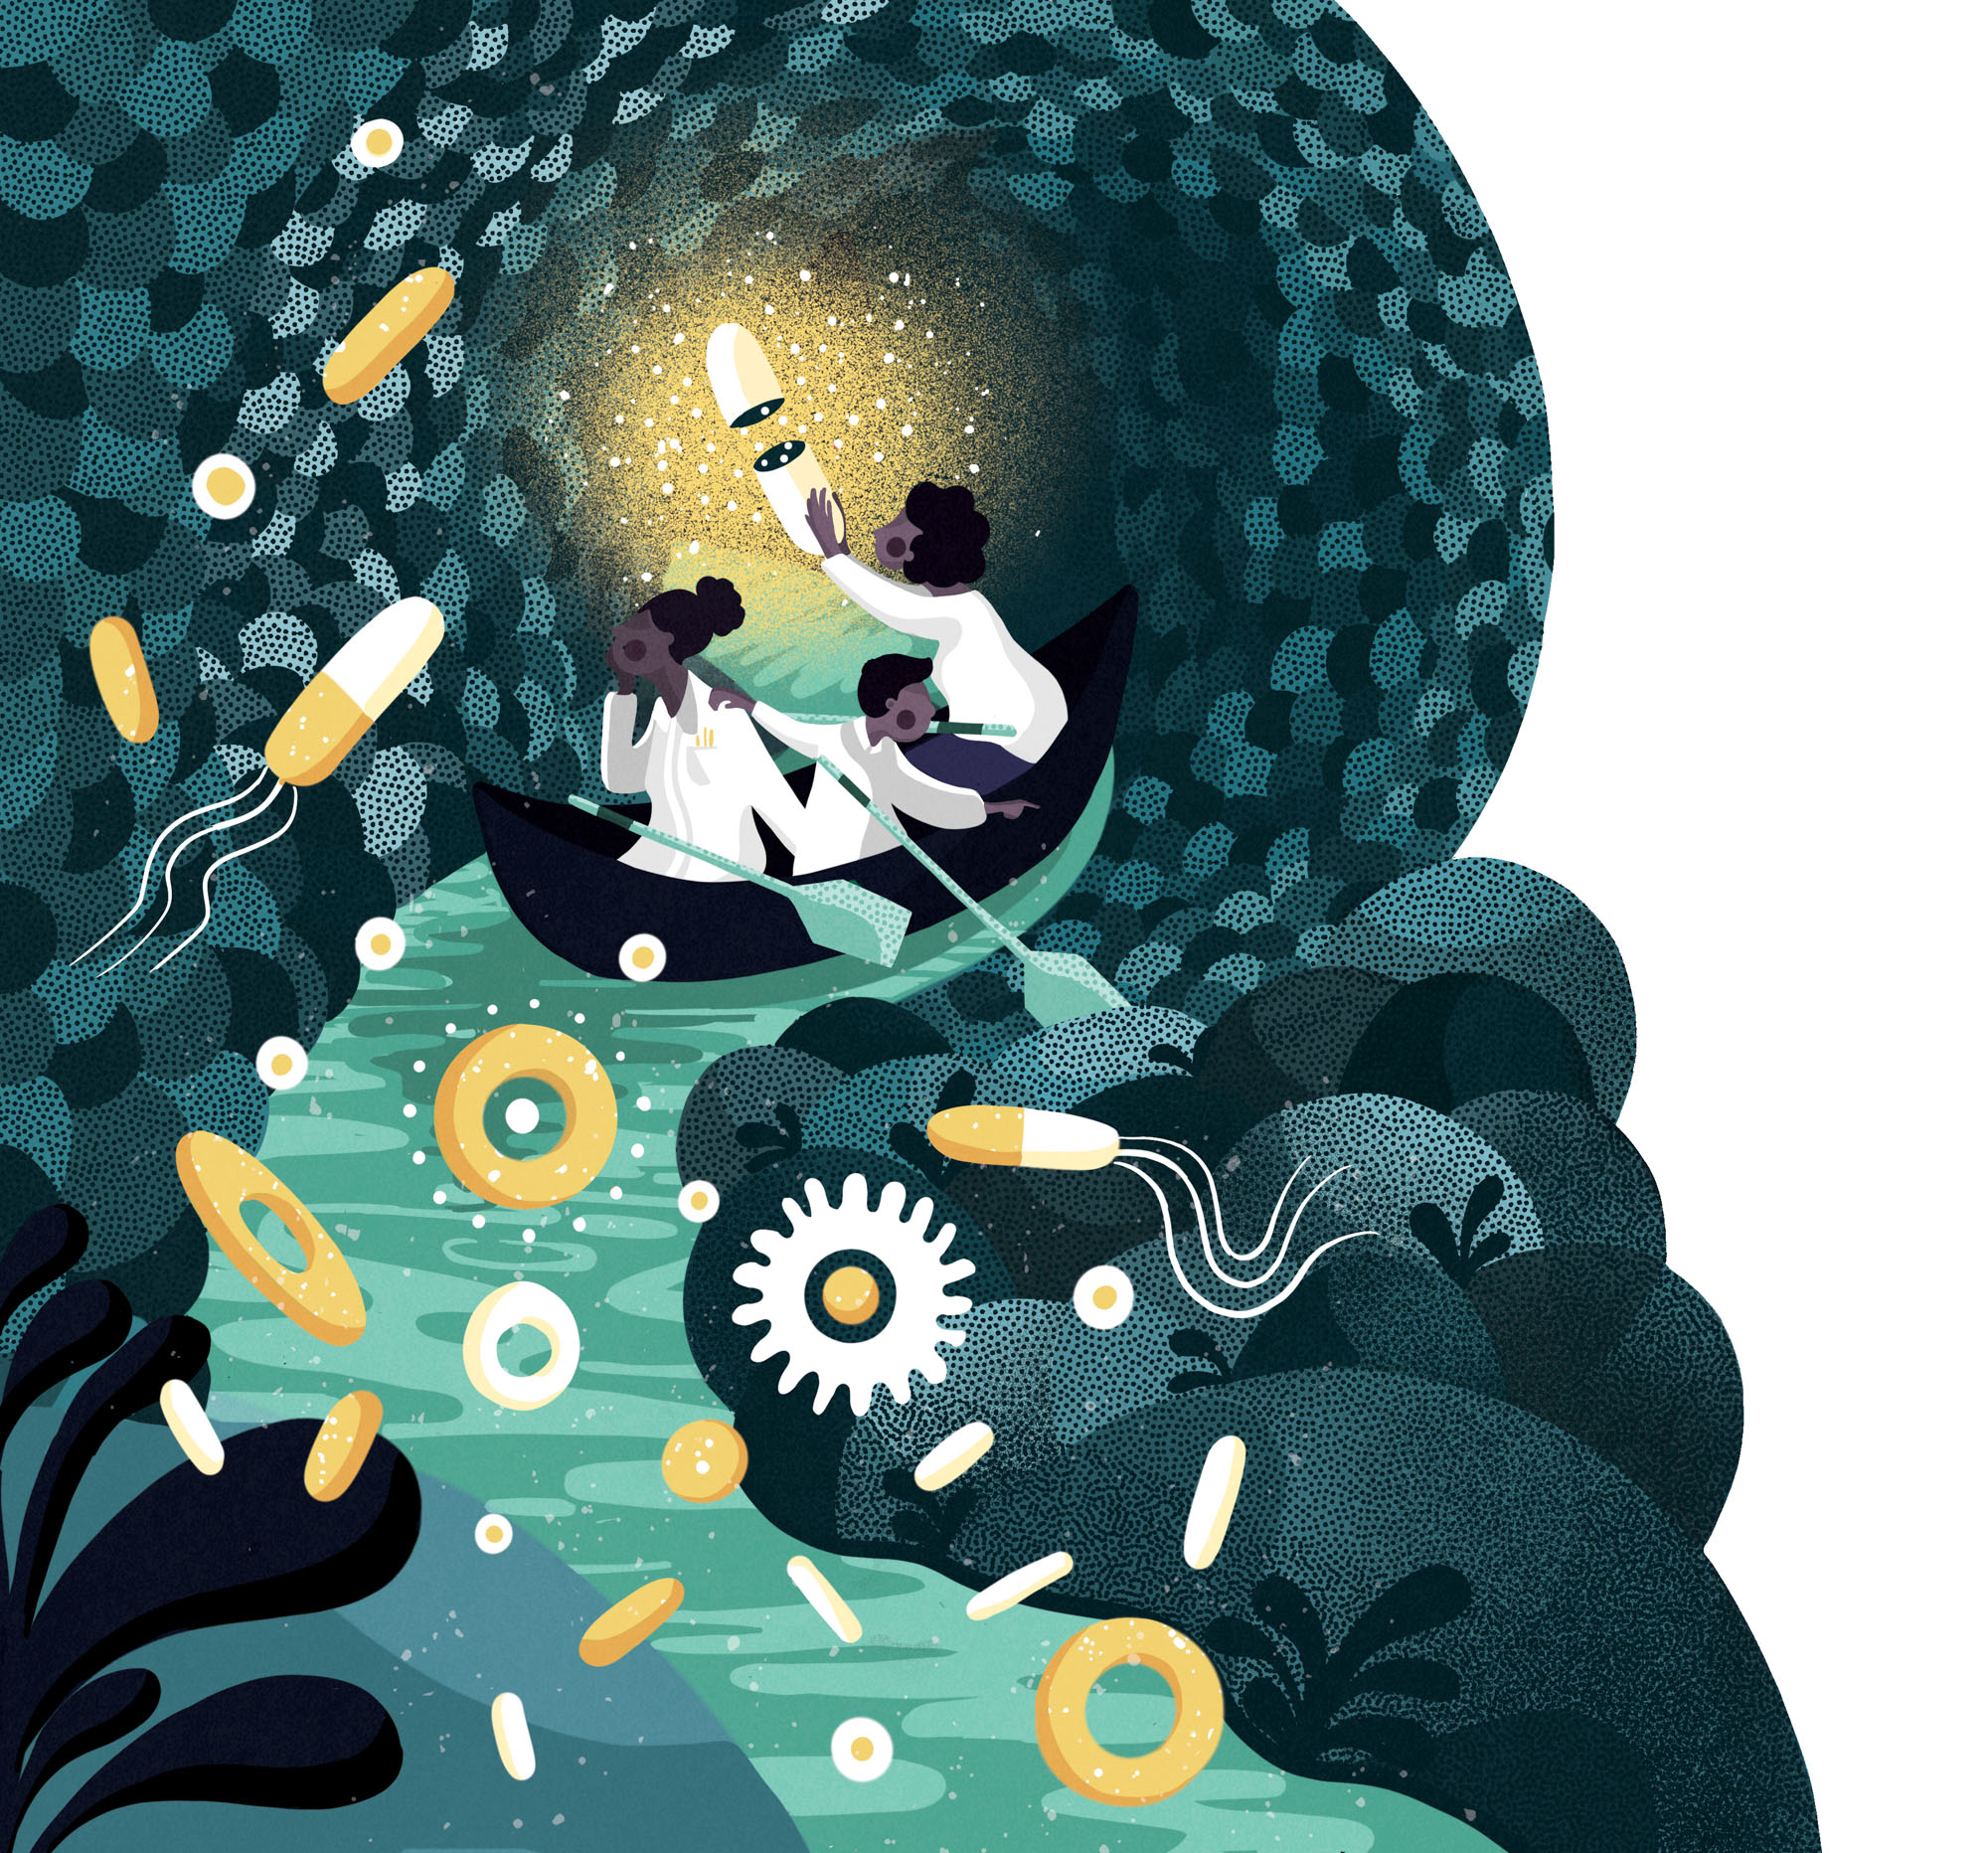 Illustration of three scientists embarking on a canoe through a gut, marveling at the wonder of the microbes around them